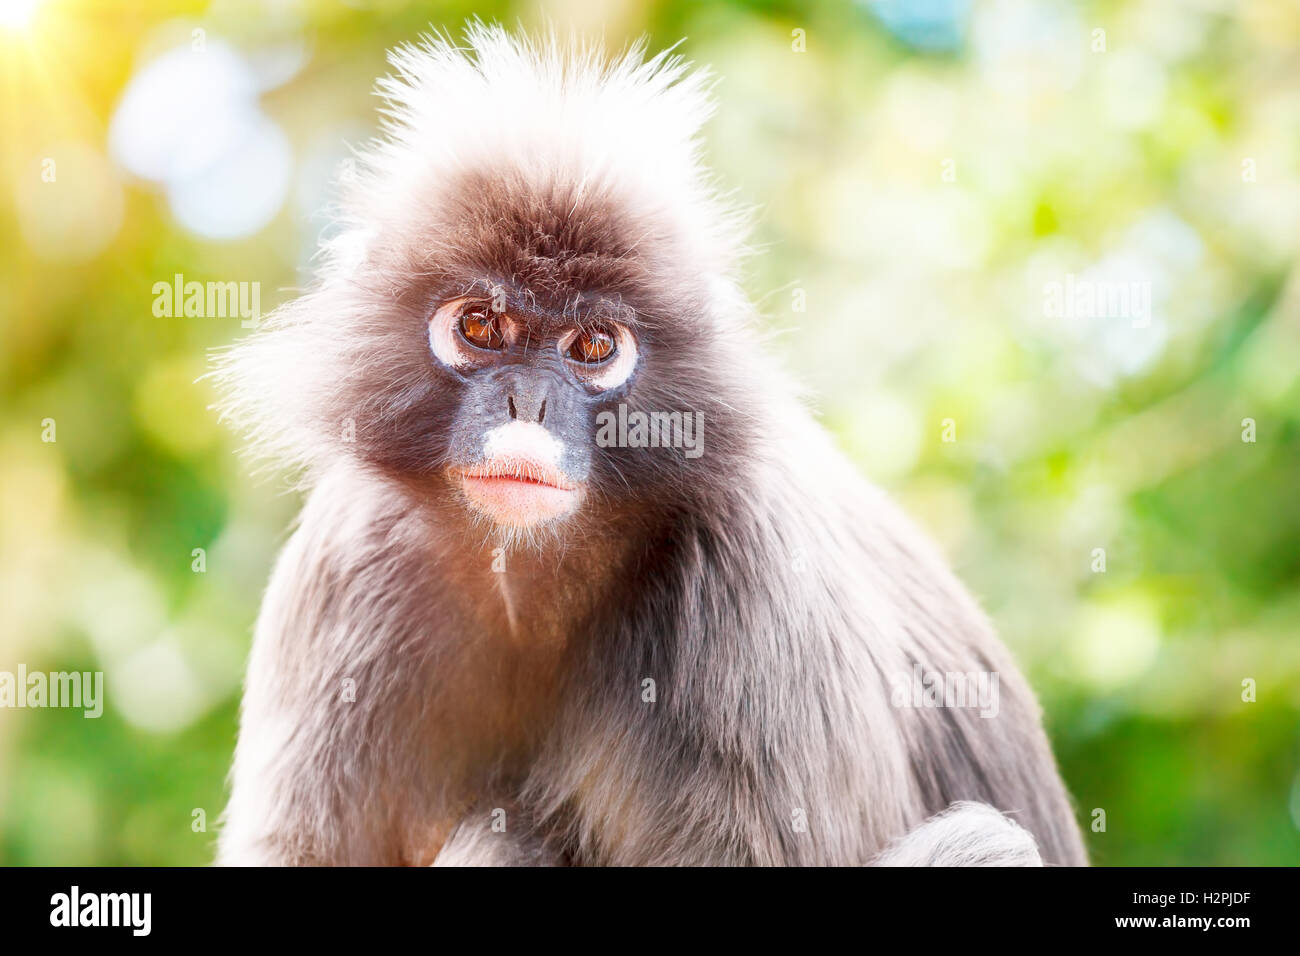 Dusky Leaf Monkey, close up portrait of a monkey face in a tropical forest, wildlife safari travel, Monkeyland, South Africa Stock Photo